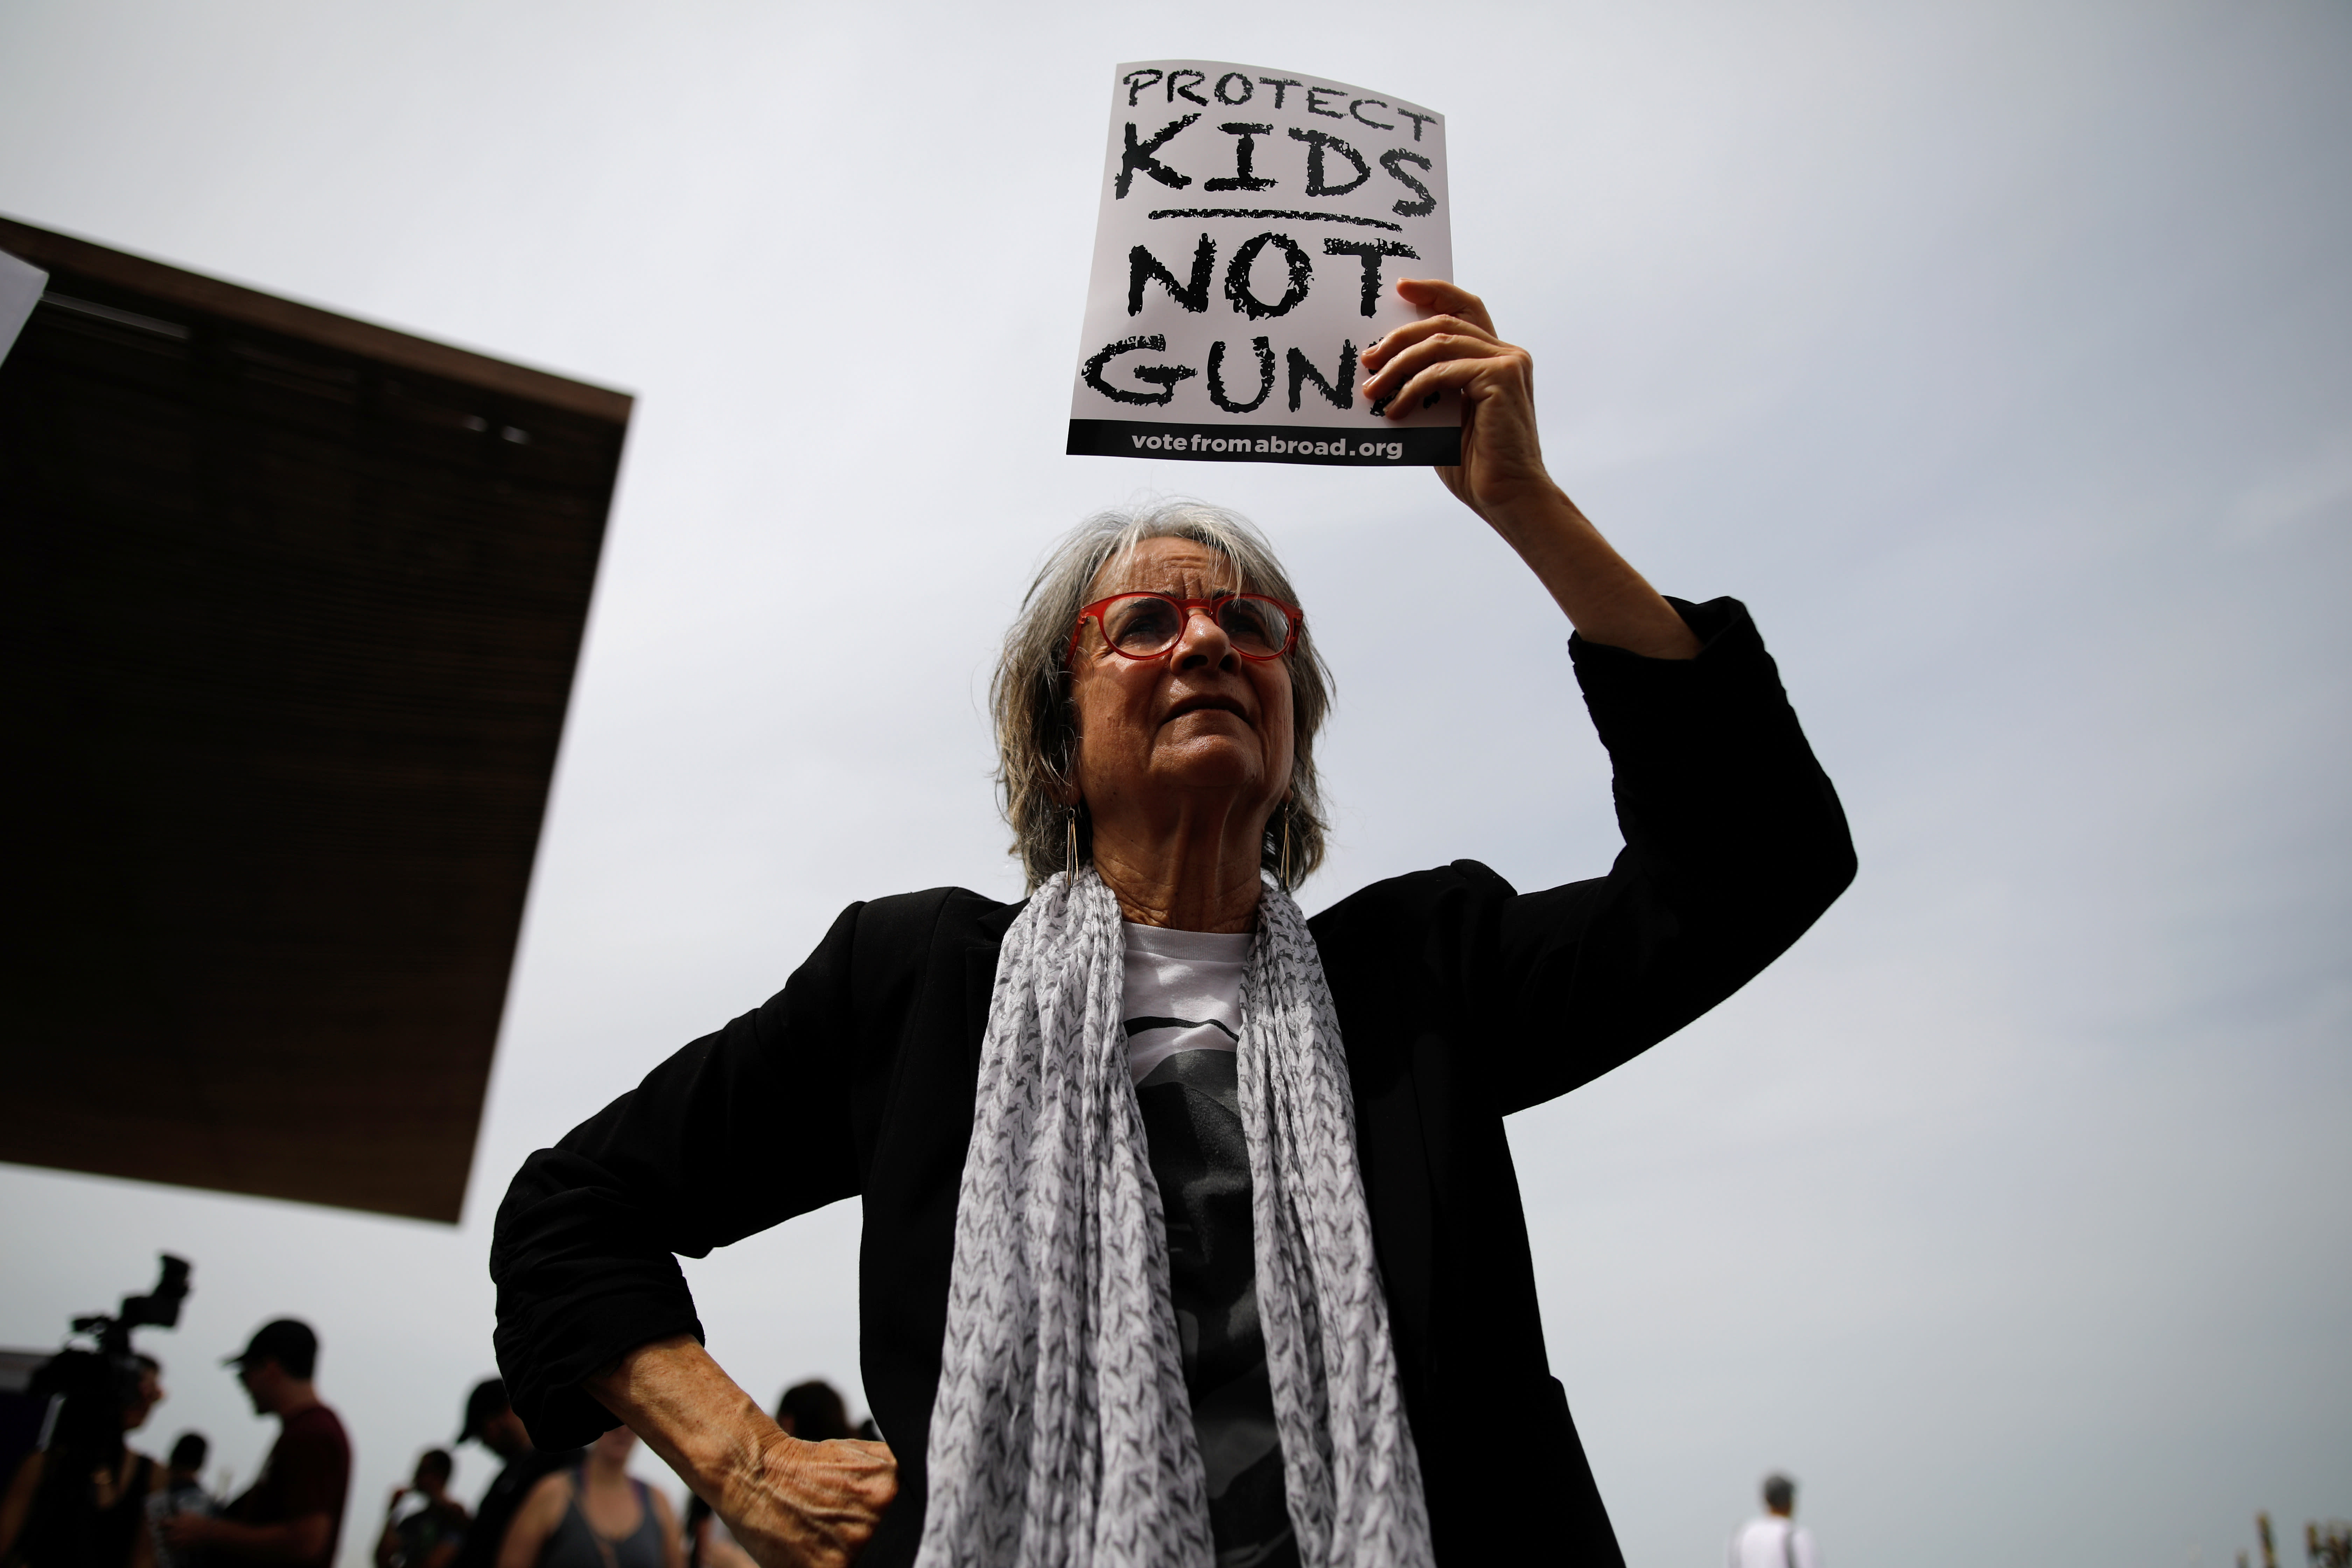 A woman takes part in a protest in front of the US Embassy, calling for enhanced gun control in the US, in Tel Aviv, Israel, March 23, 2018. (Reuters/Corinna Kern)